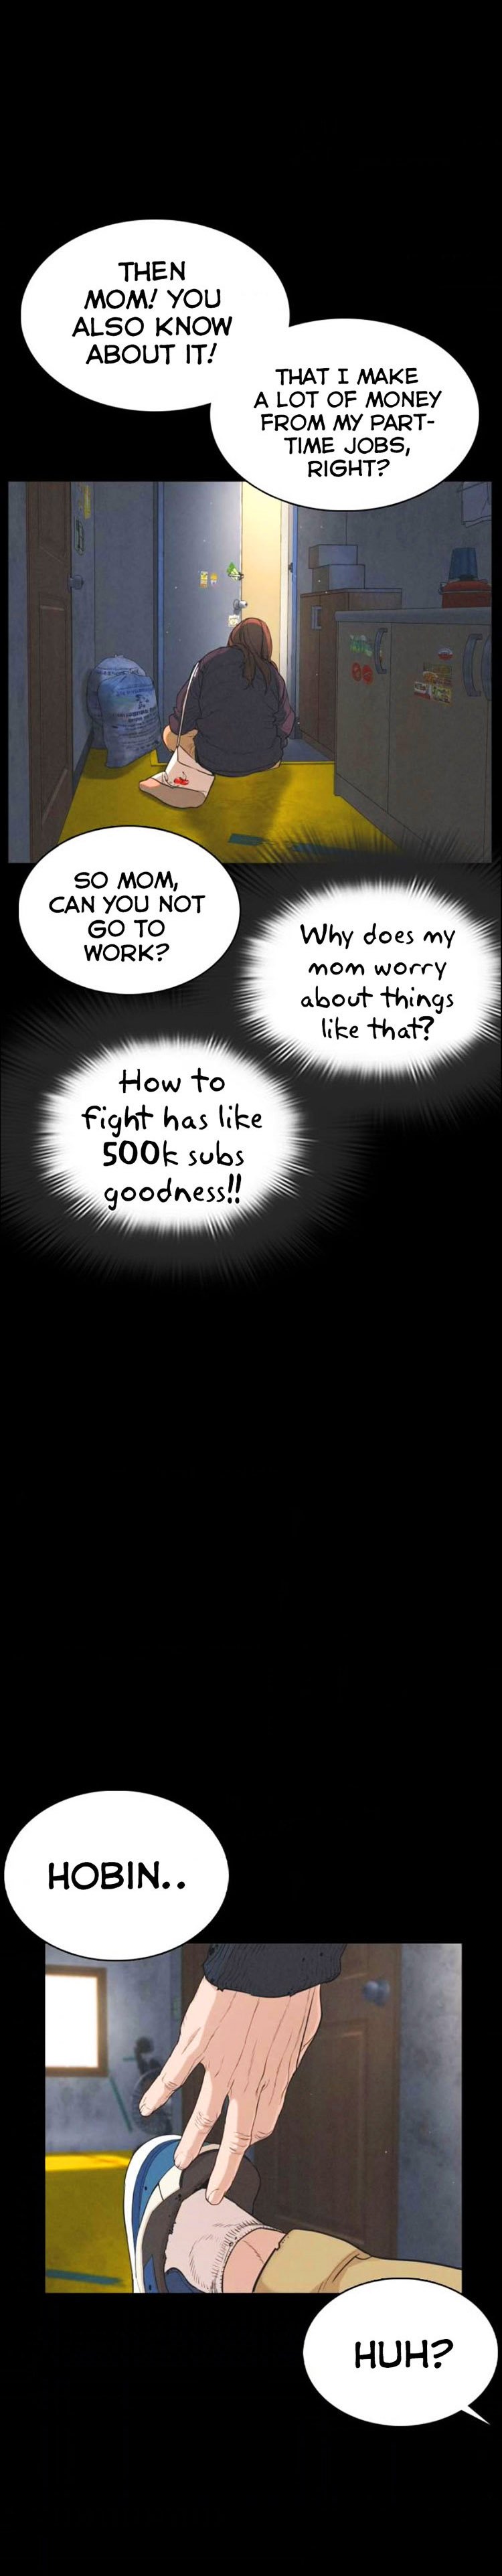 how-to-fight-chap-49-13